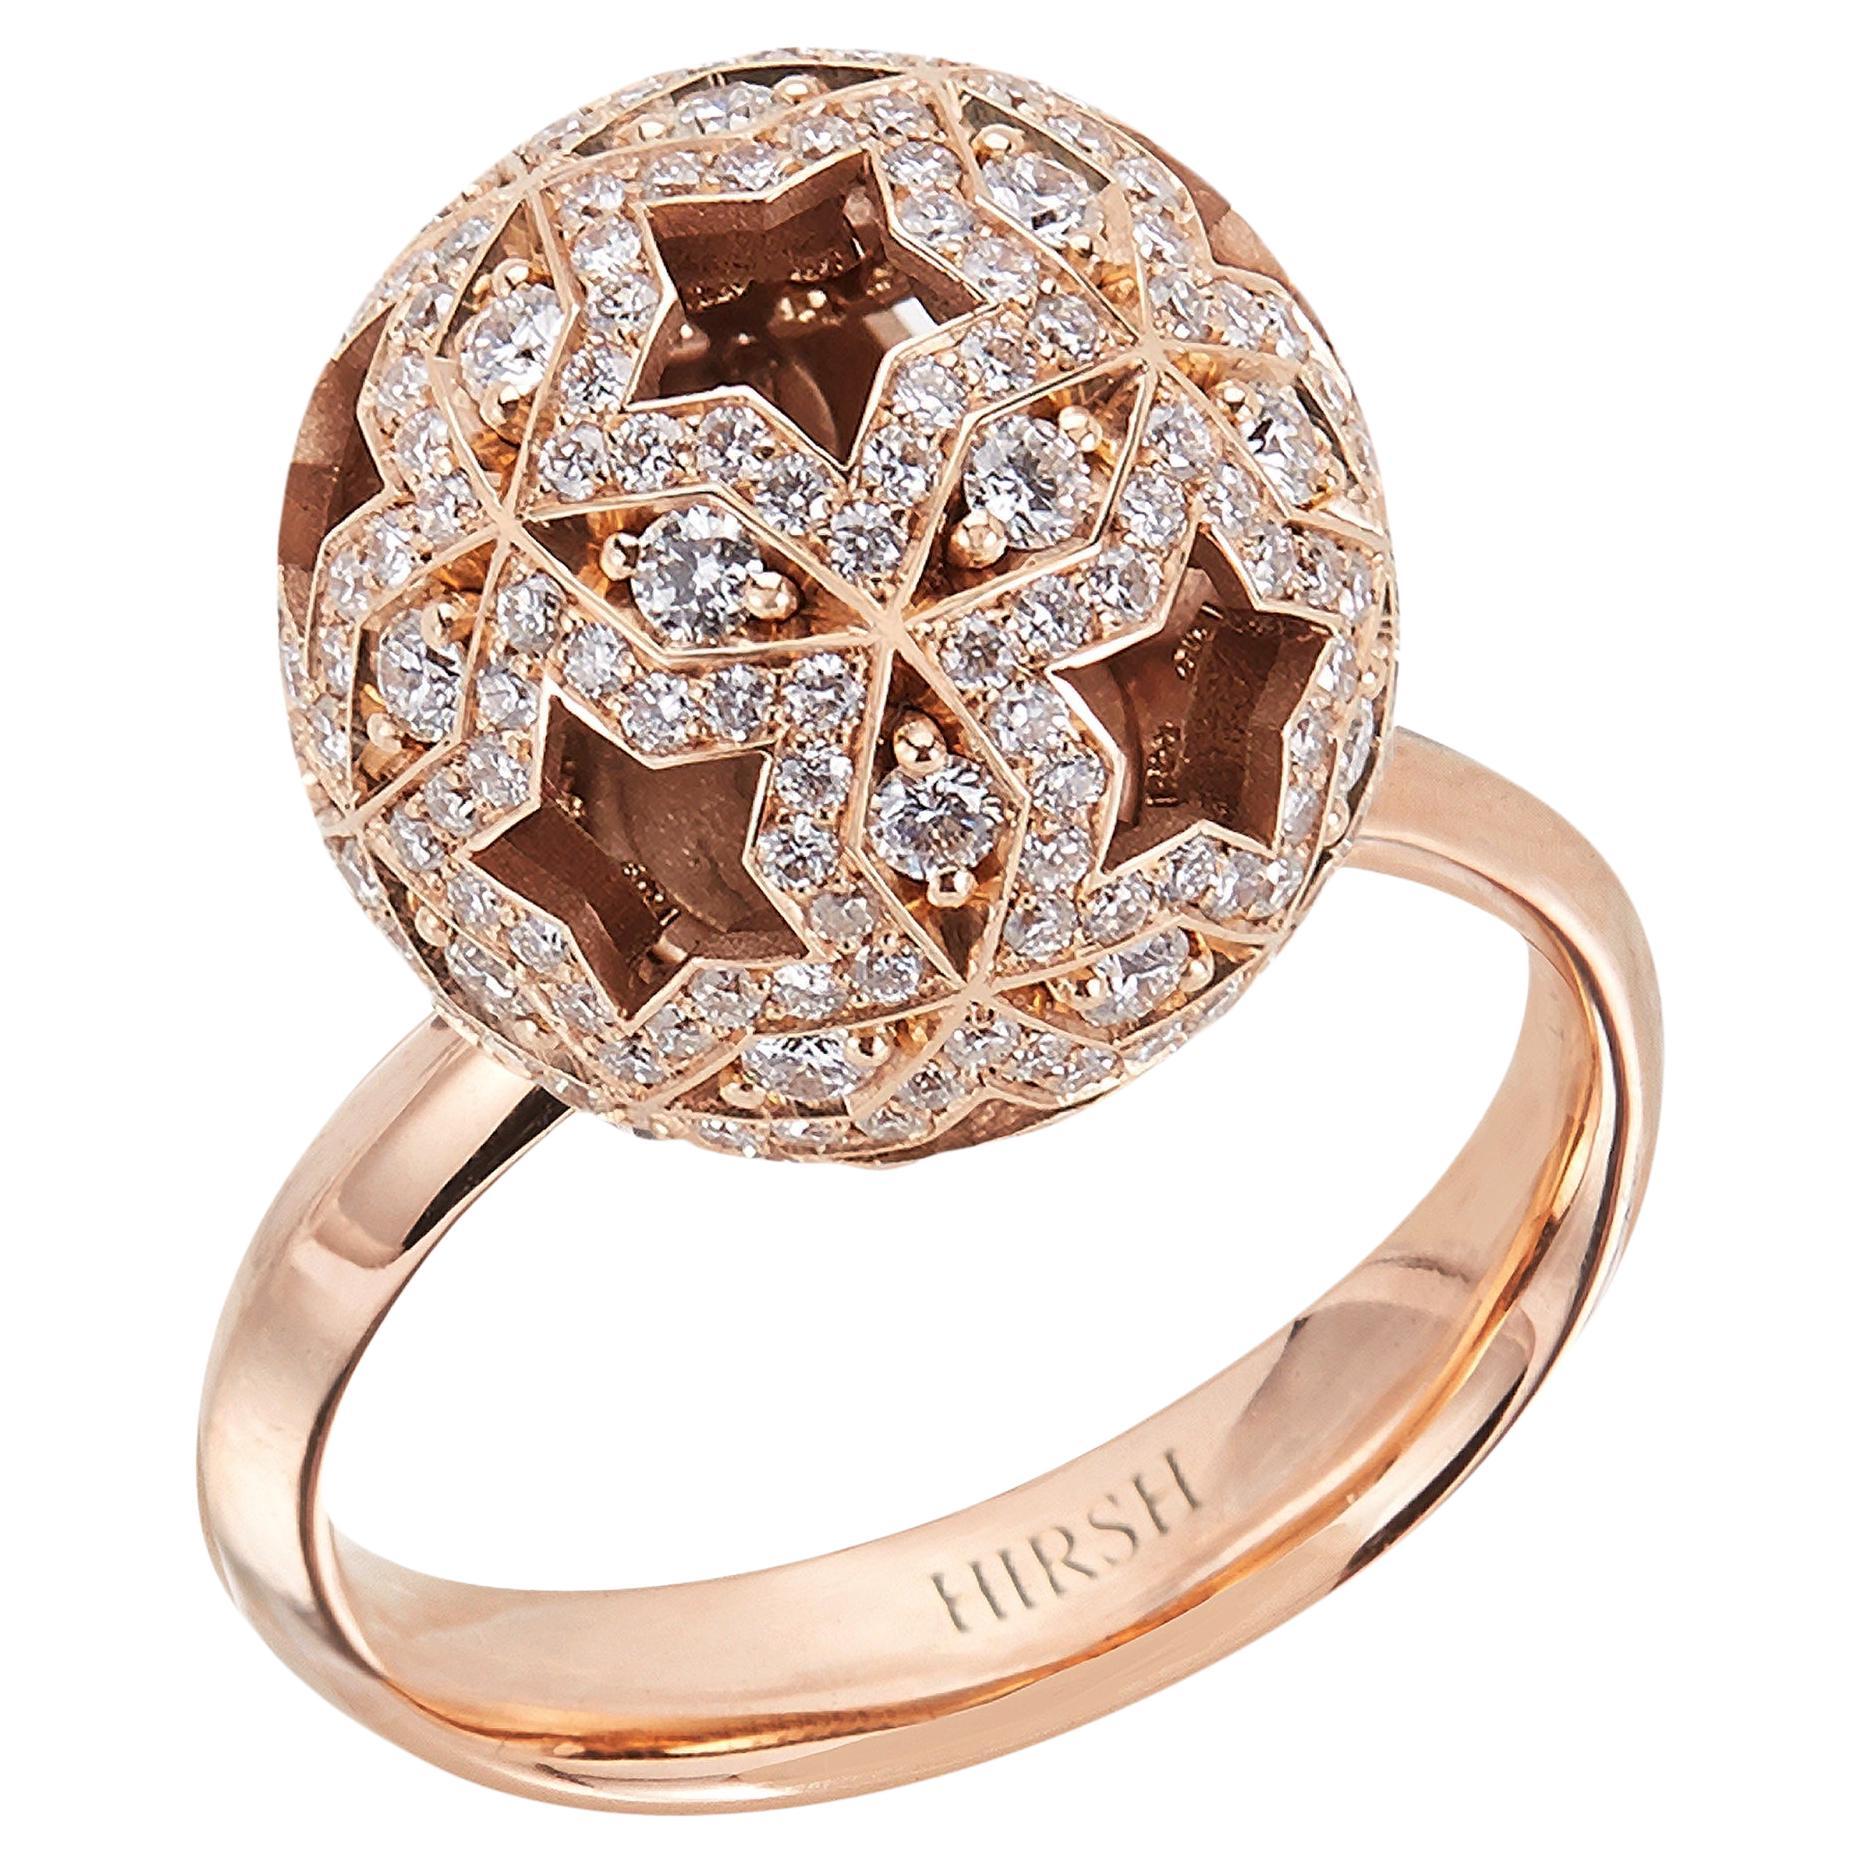 Hirsh Celestial Orion Diamond and Rose Gold Ring